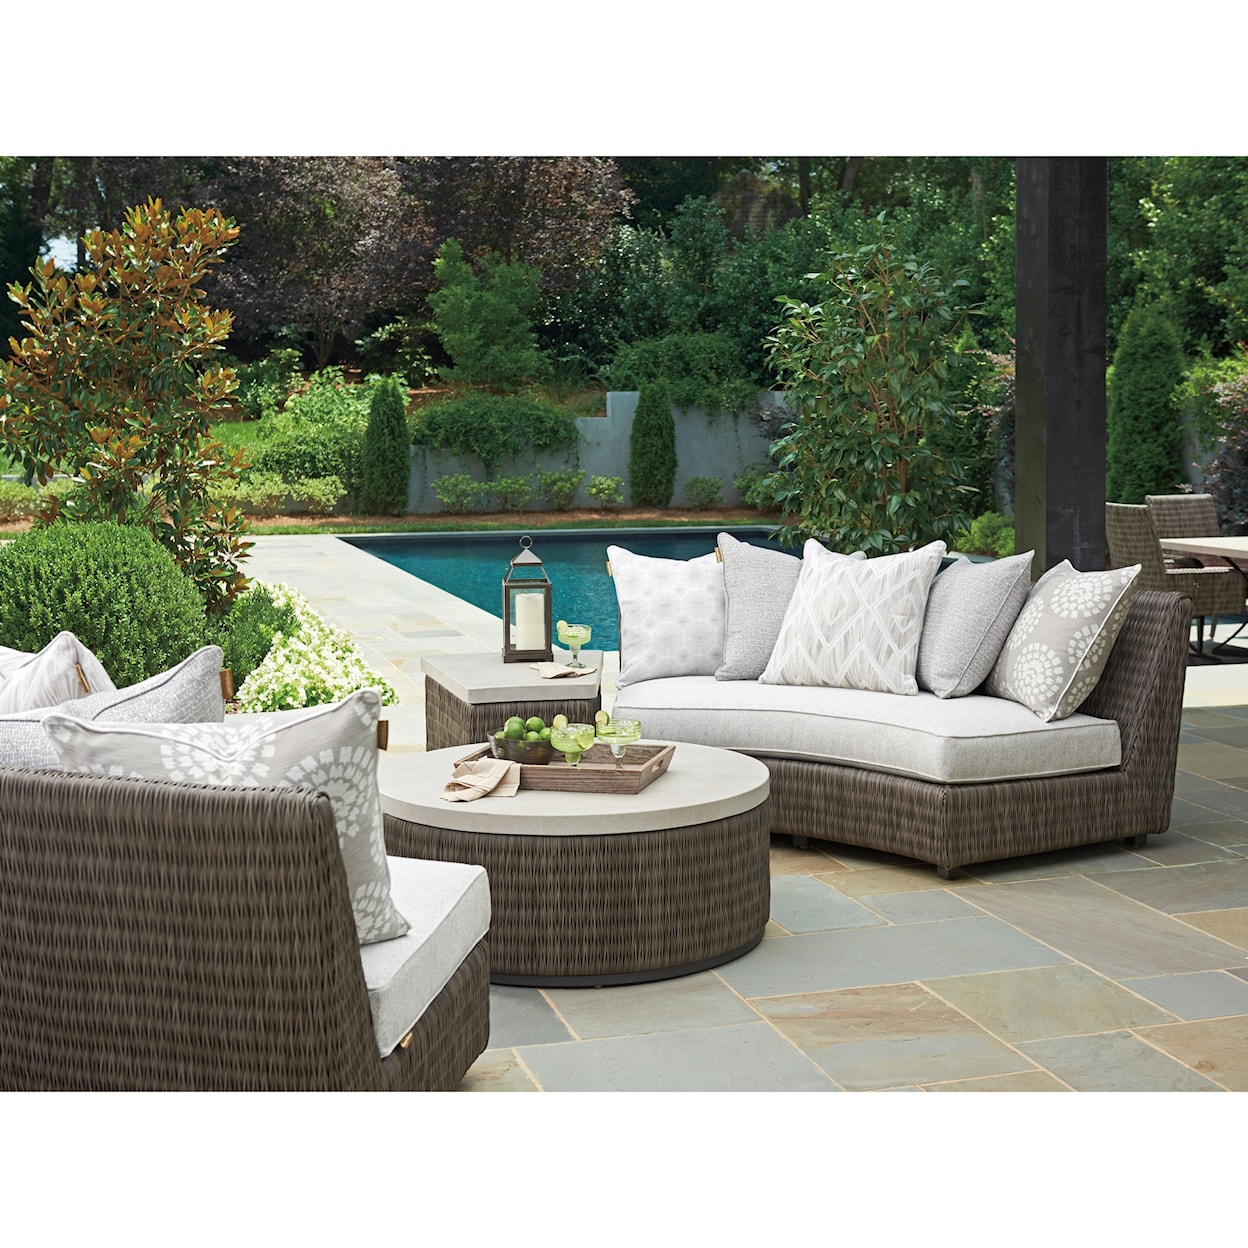 Tommy Bahama Outdoor Living Cypress Point Ocean Terrace Outdoor Armless Sofa w/ Scatterback Cushions